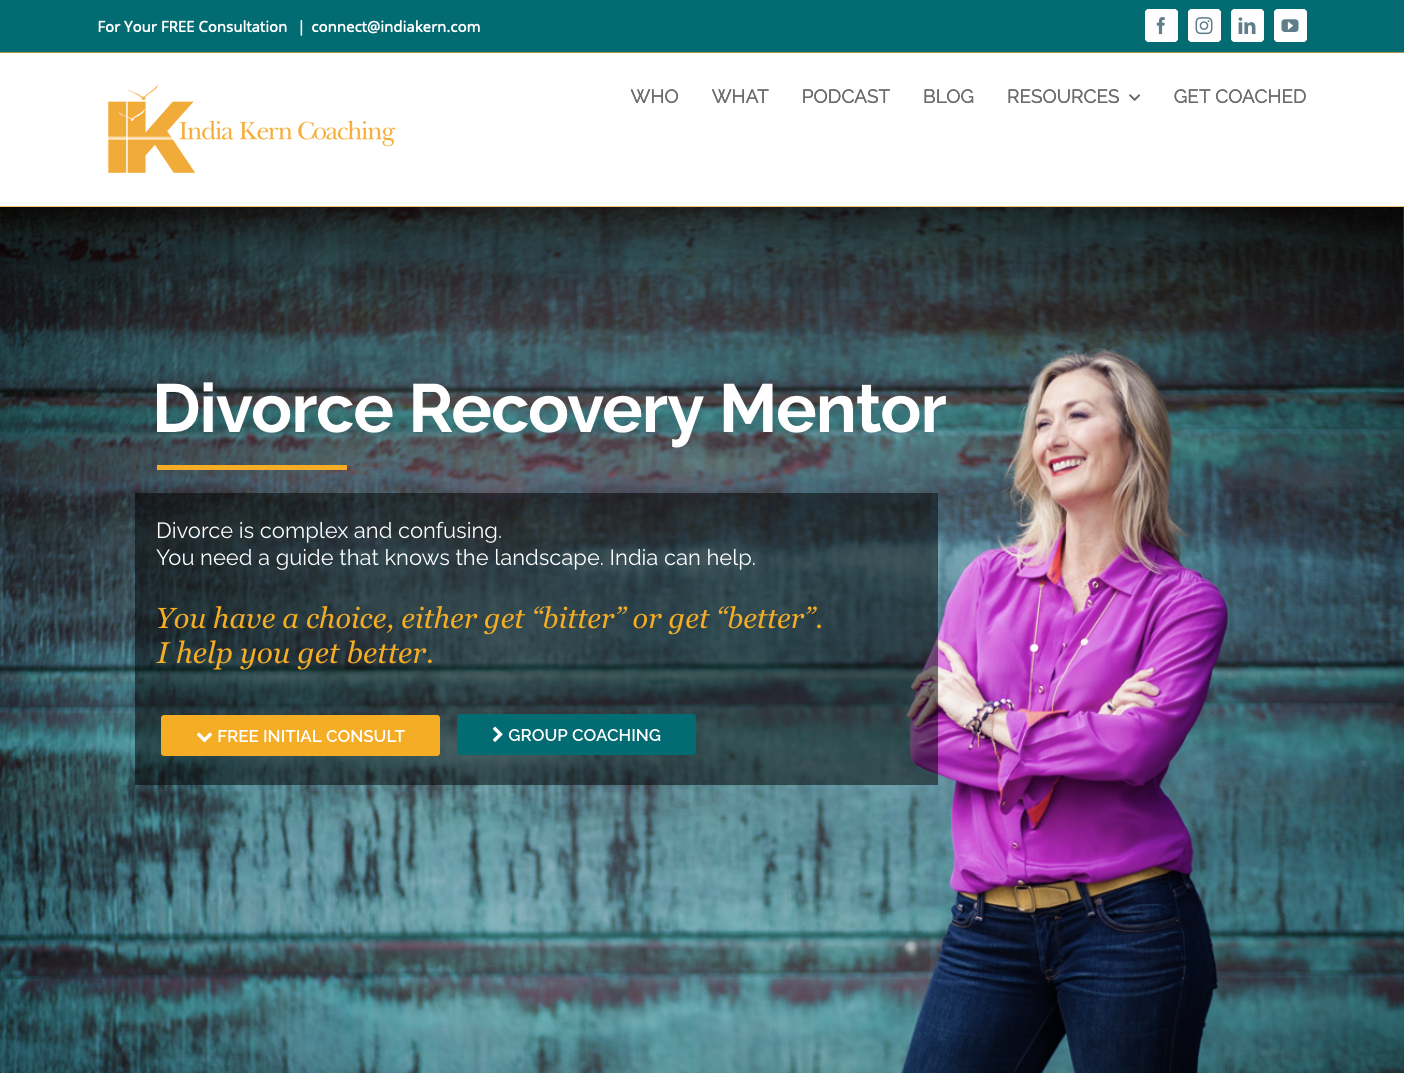 India Kern - Divorce Recovery Mentor